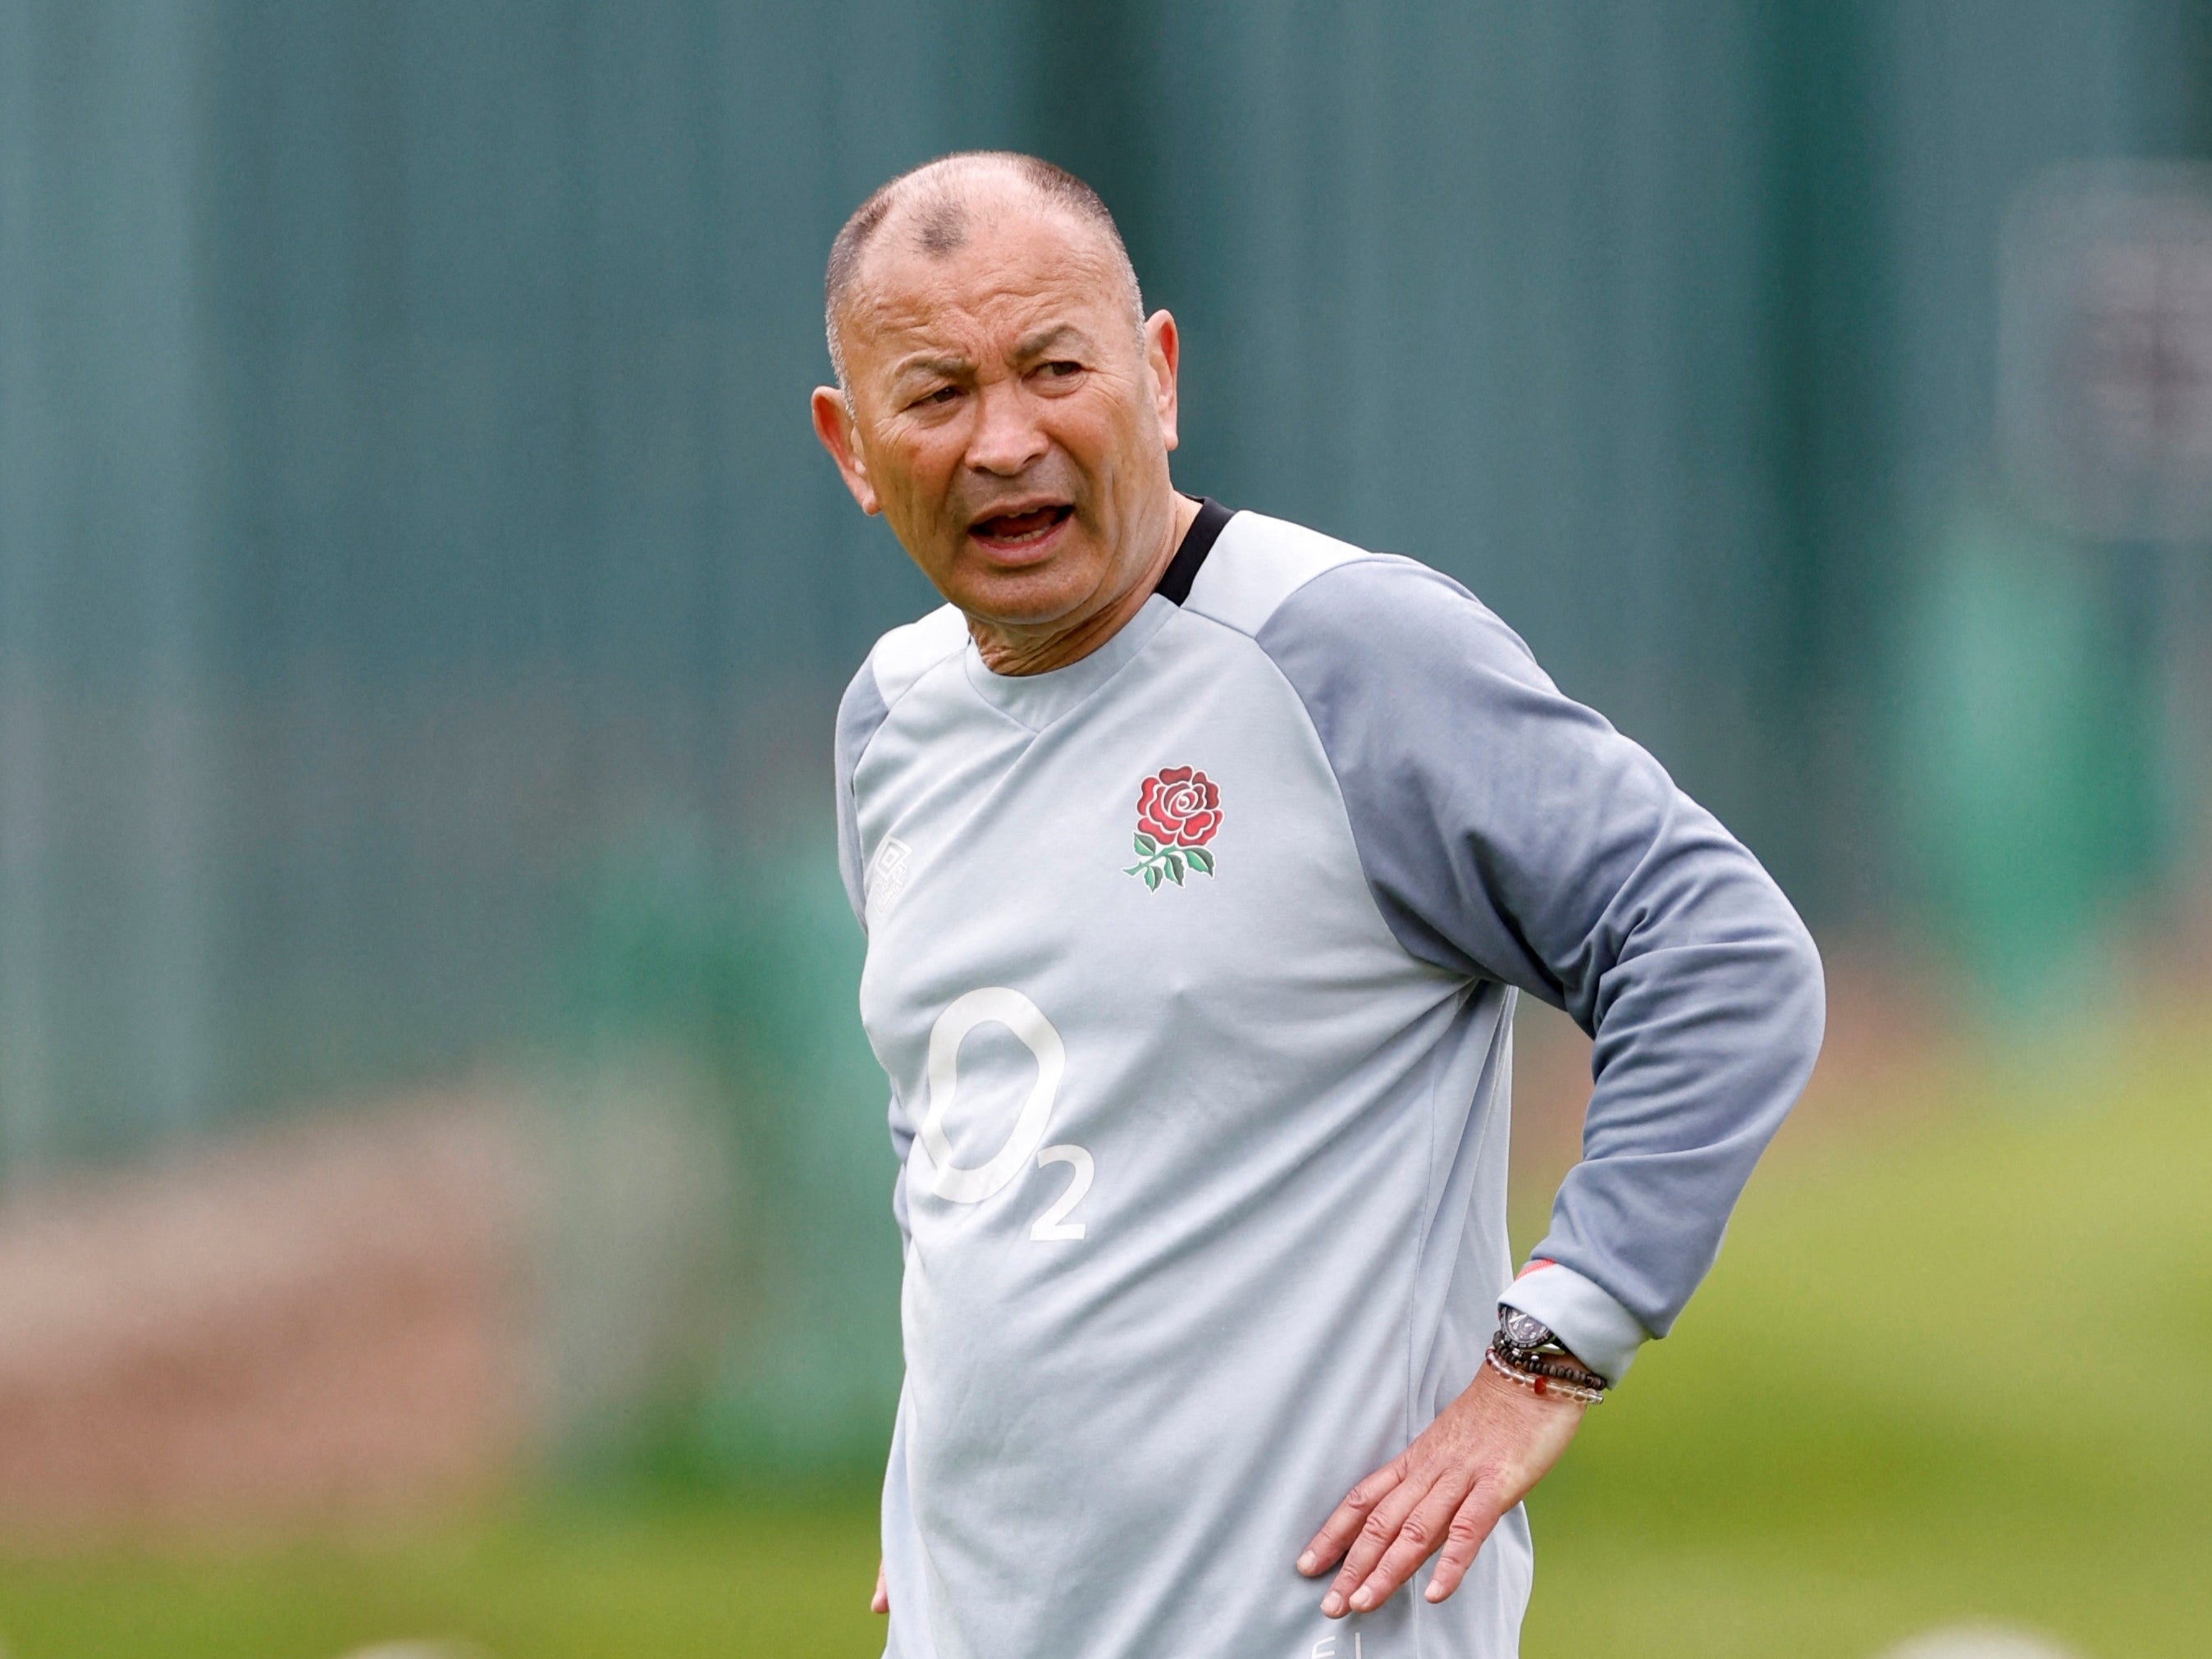 Eddie Jones has named a 36-player squad for a three-day training squad ahead of the Autumn Internationals